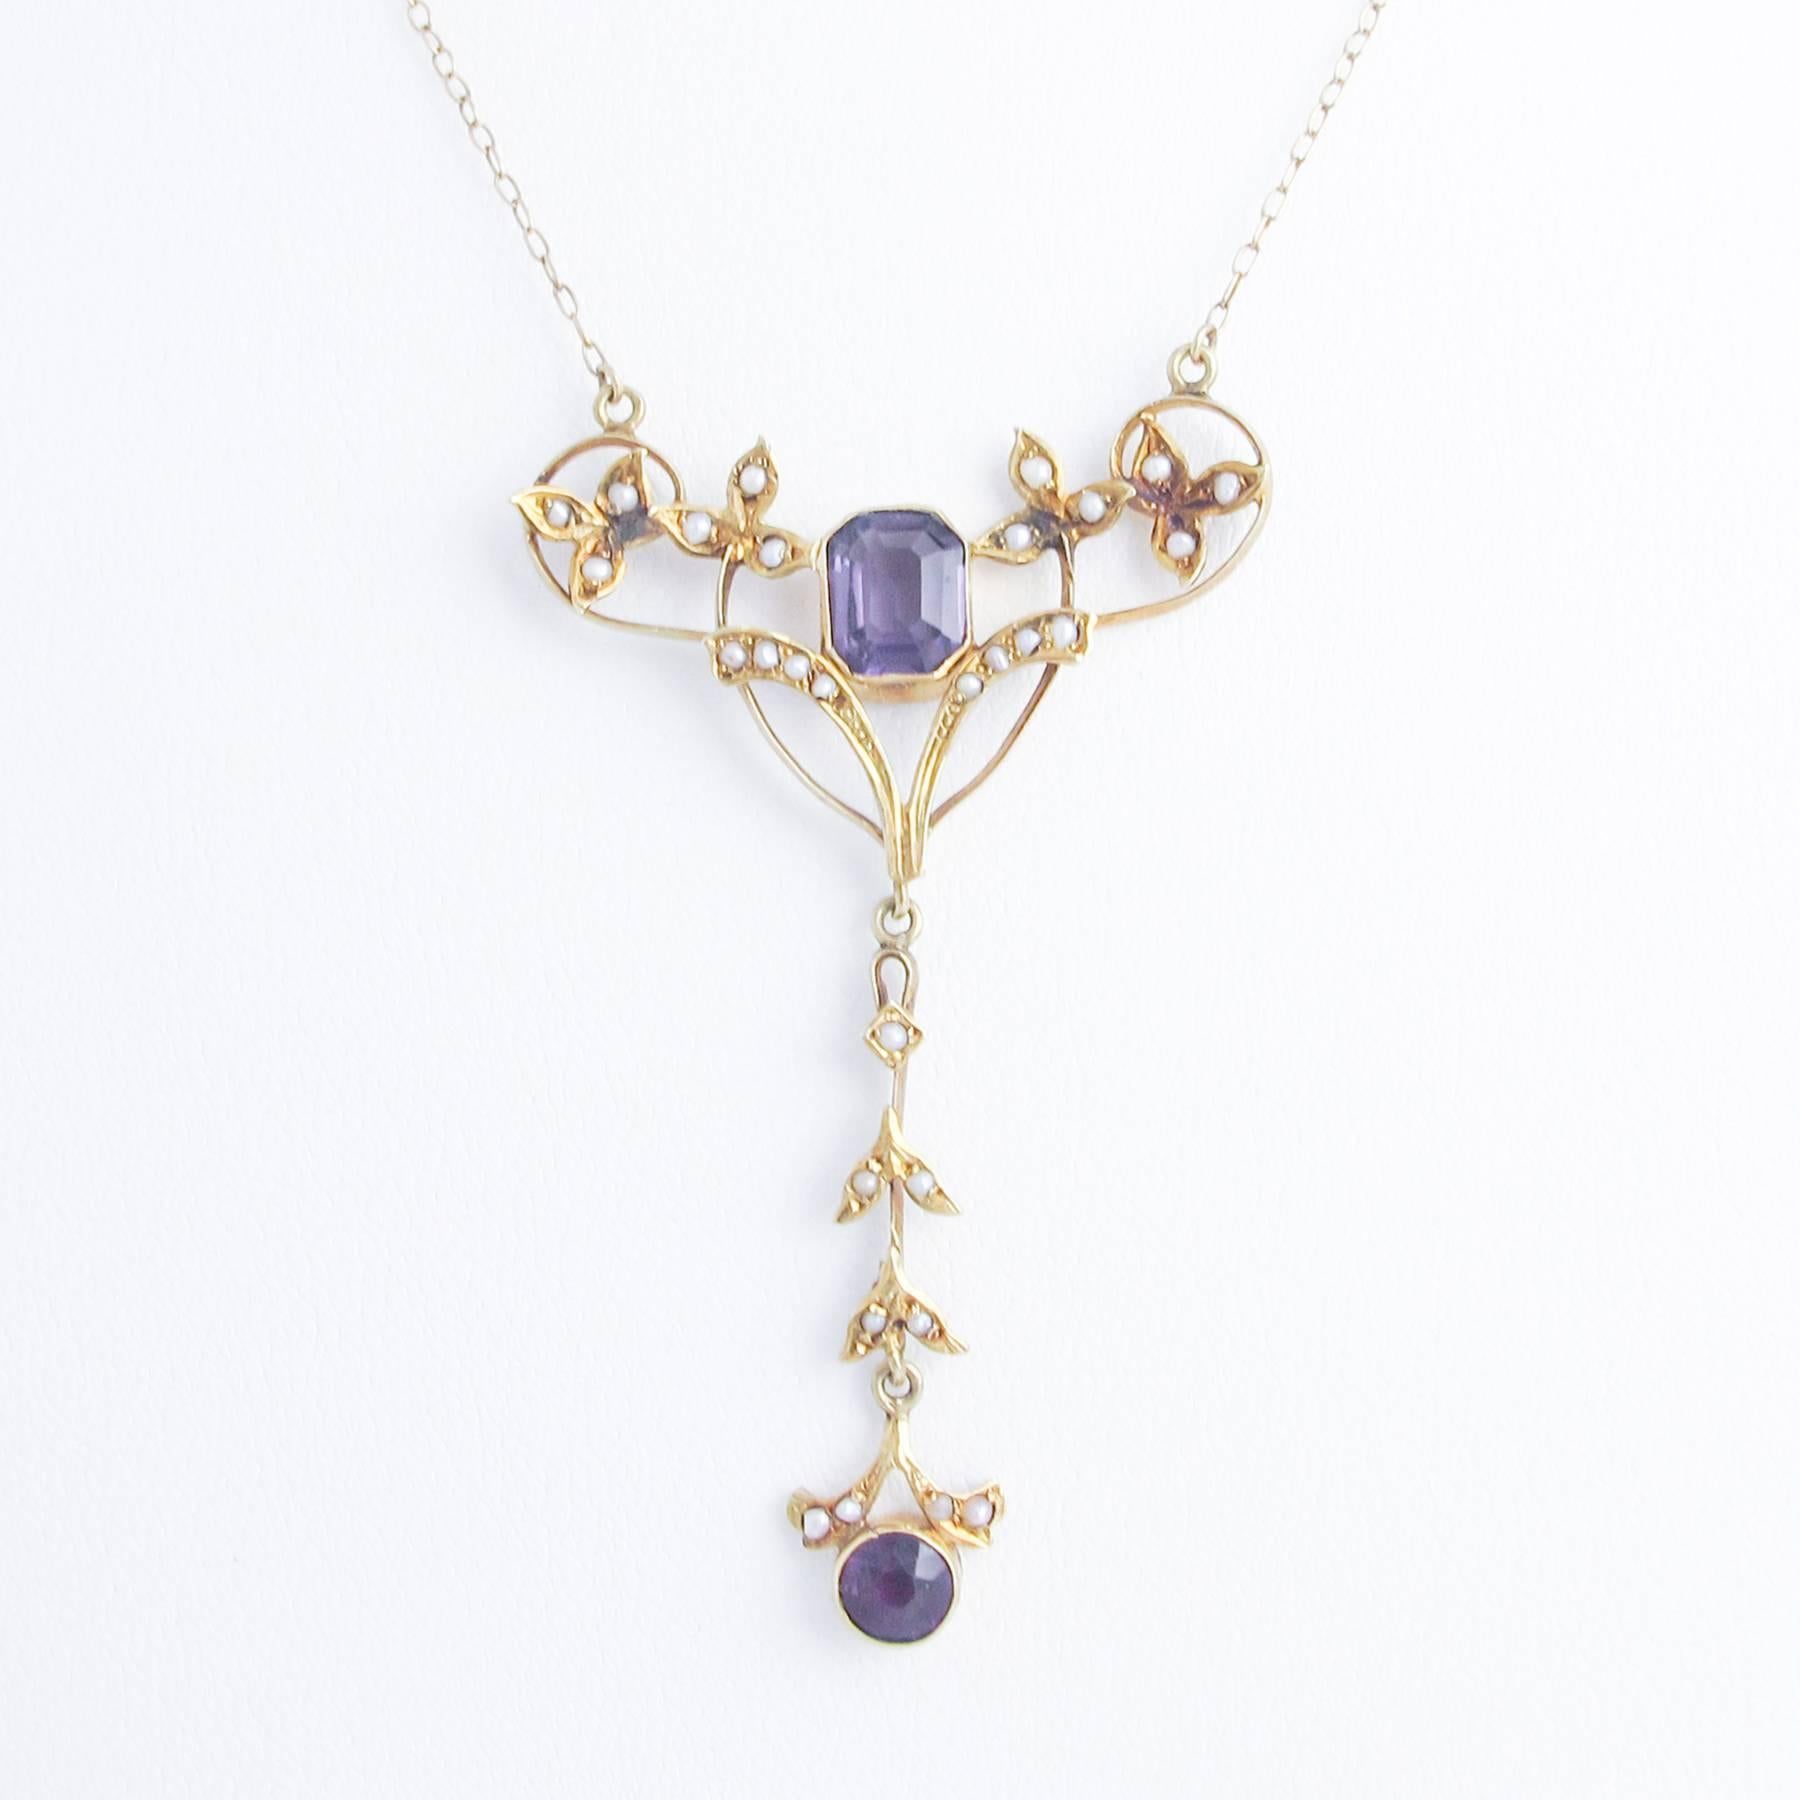 This 19th Century Art Nouveau French Lavaliere was hand crafted and set with Amethysts and natural Silver Gulf Pearls in three articulated sections. 

Wishbone motif is beautifully constructed and the Drop is elegant and impressive. The